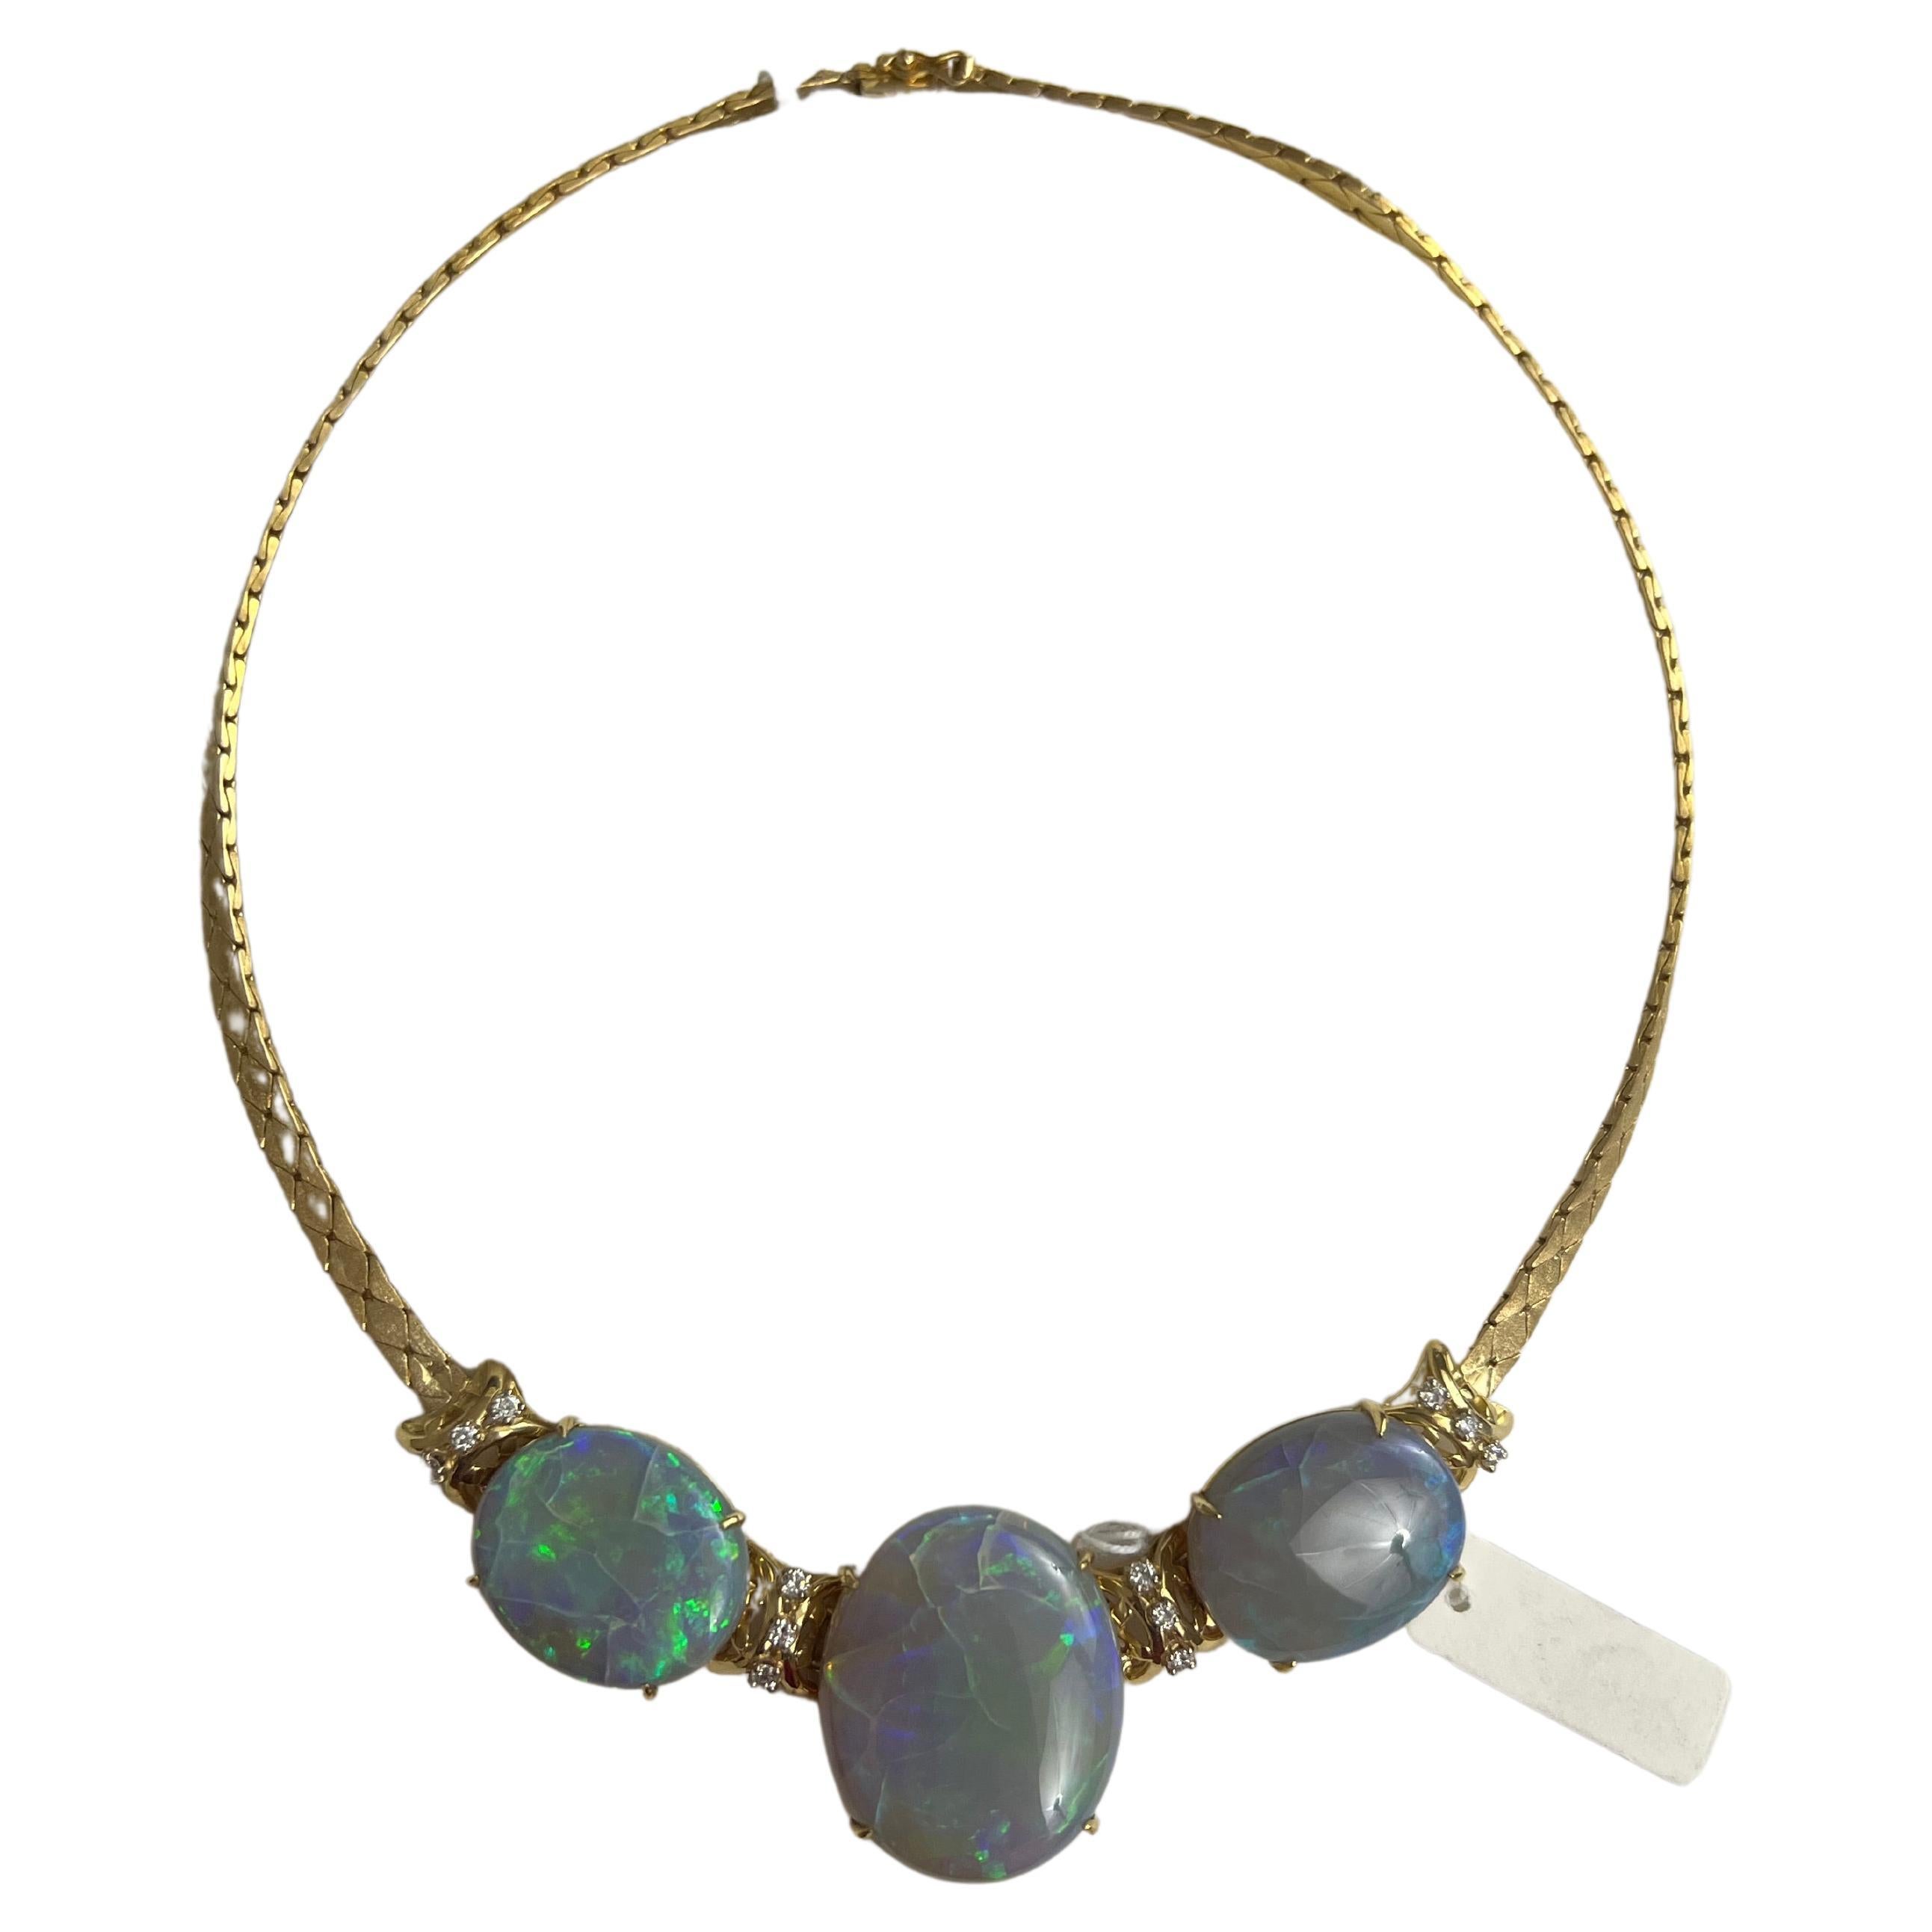 Lady's Opal and Diamonds Necklace in 14k Yellow Gold